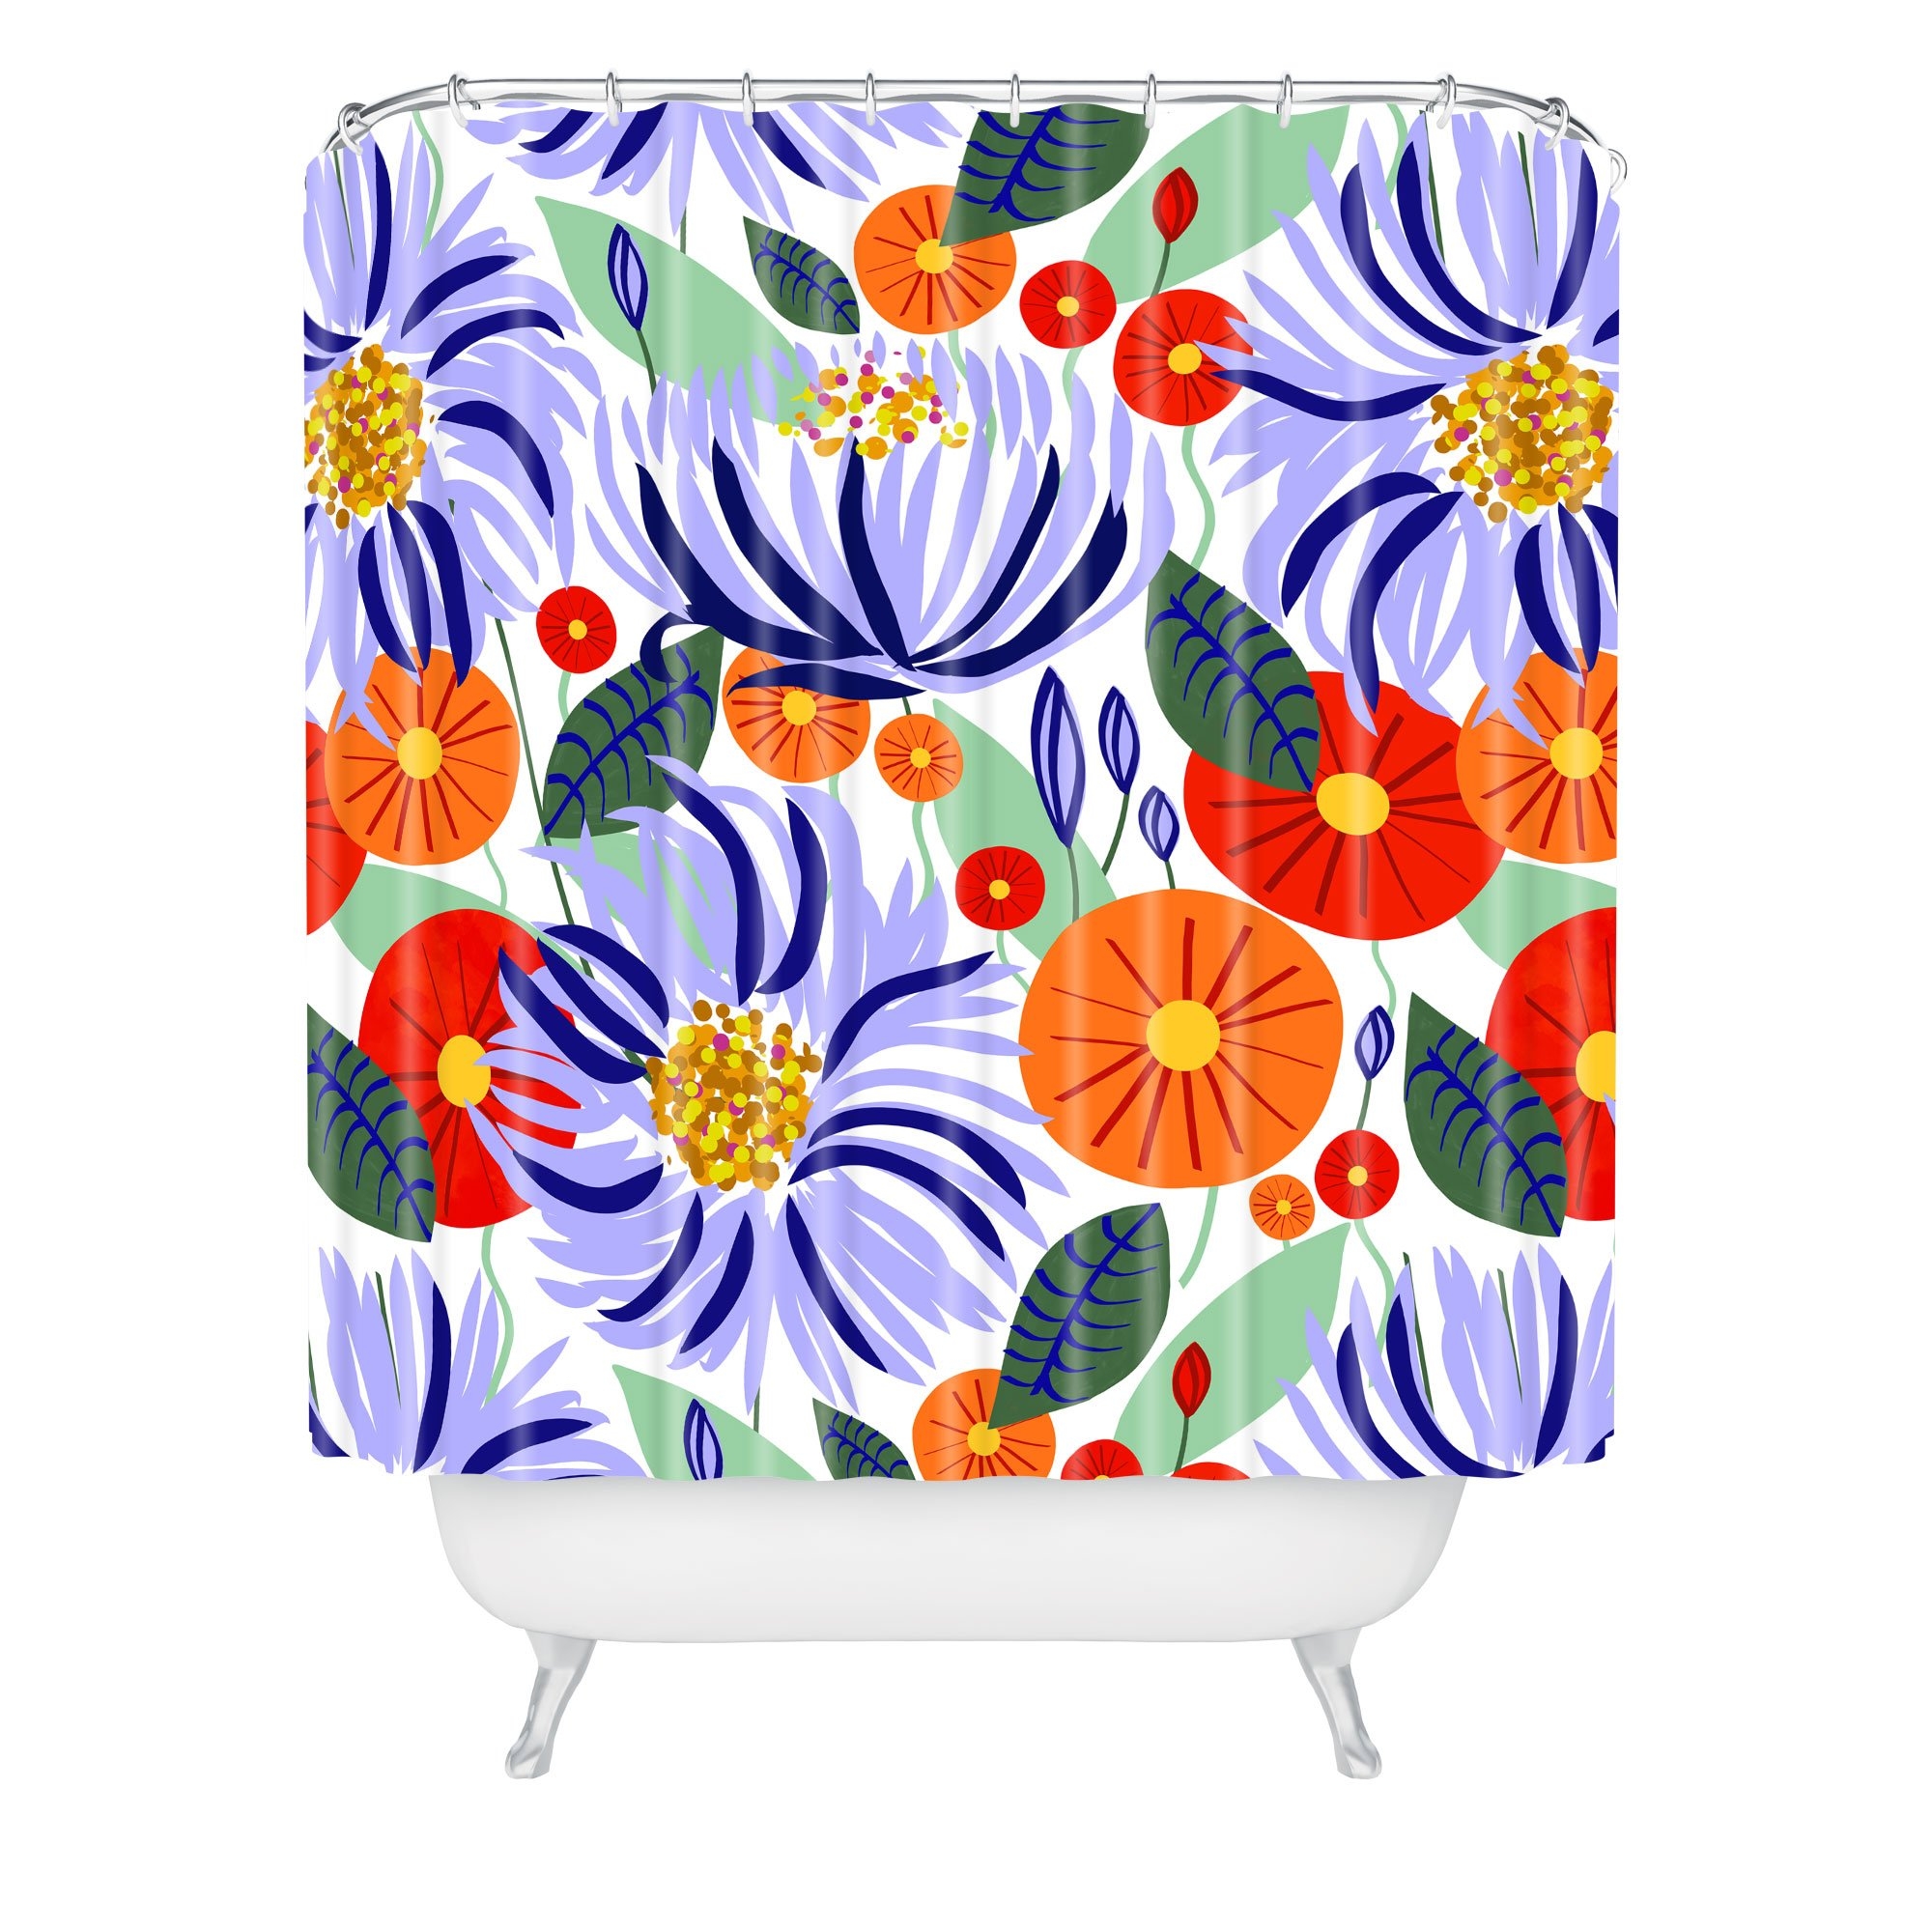 83 Oranges Alia Shower Curtain - Standard 71"x74" with Liner - Image 0